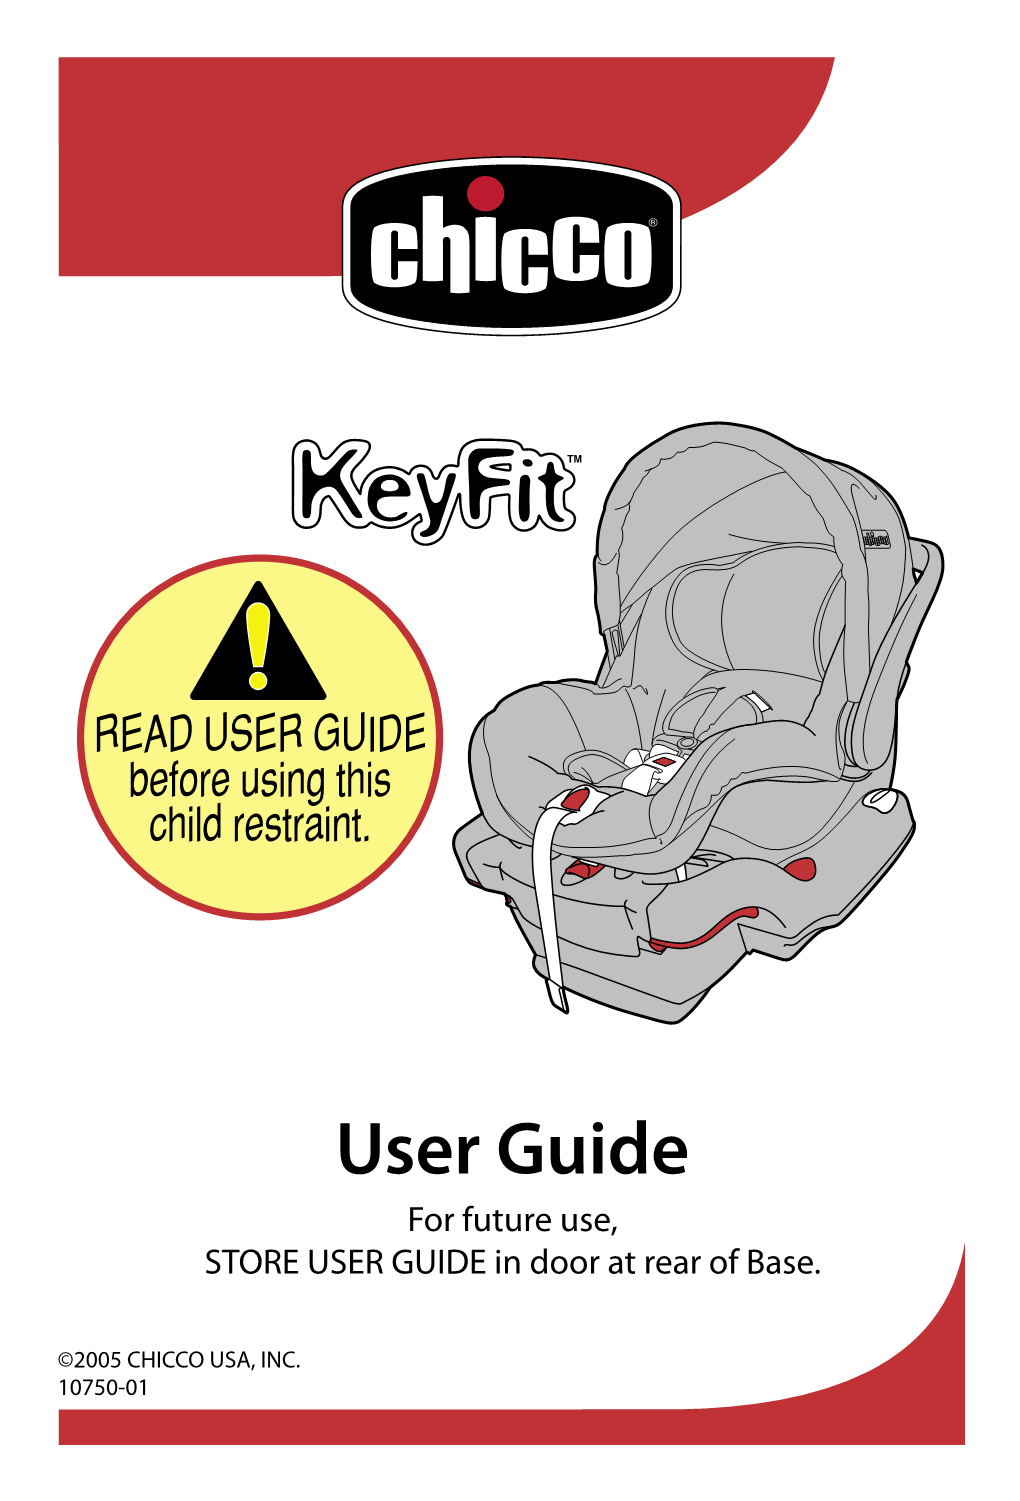 User Guide to Child Restraint and Mail It Promptly